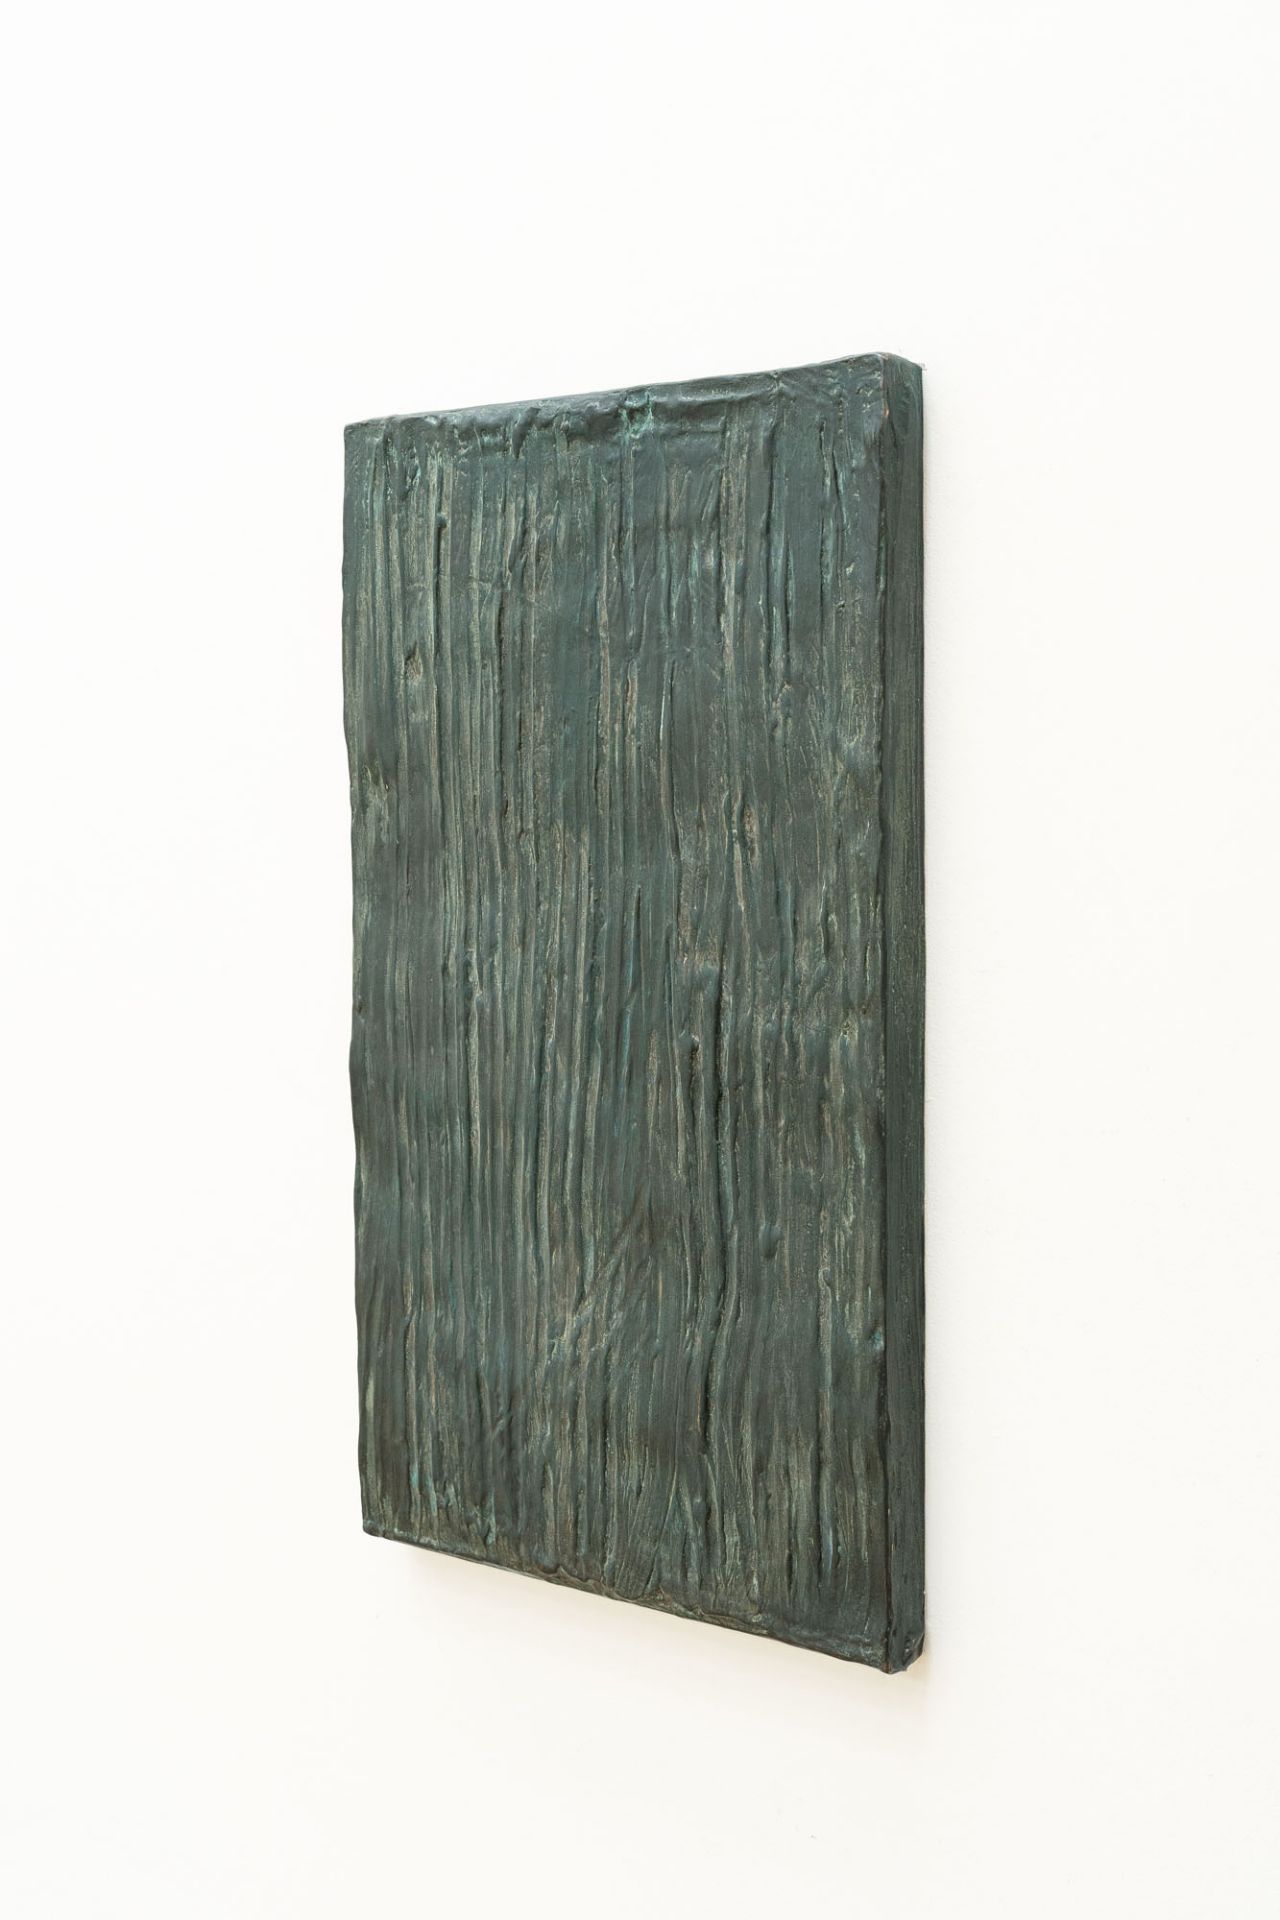 Günther Förg, Untitled (Large bronze relief).Bronze with dark green patina. (1986). Ca. 122 x 71 x 7 - Image 2 of 6